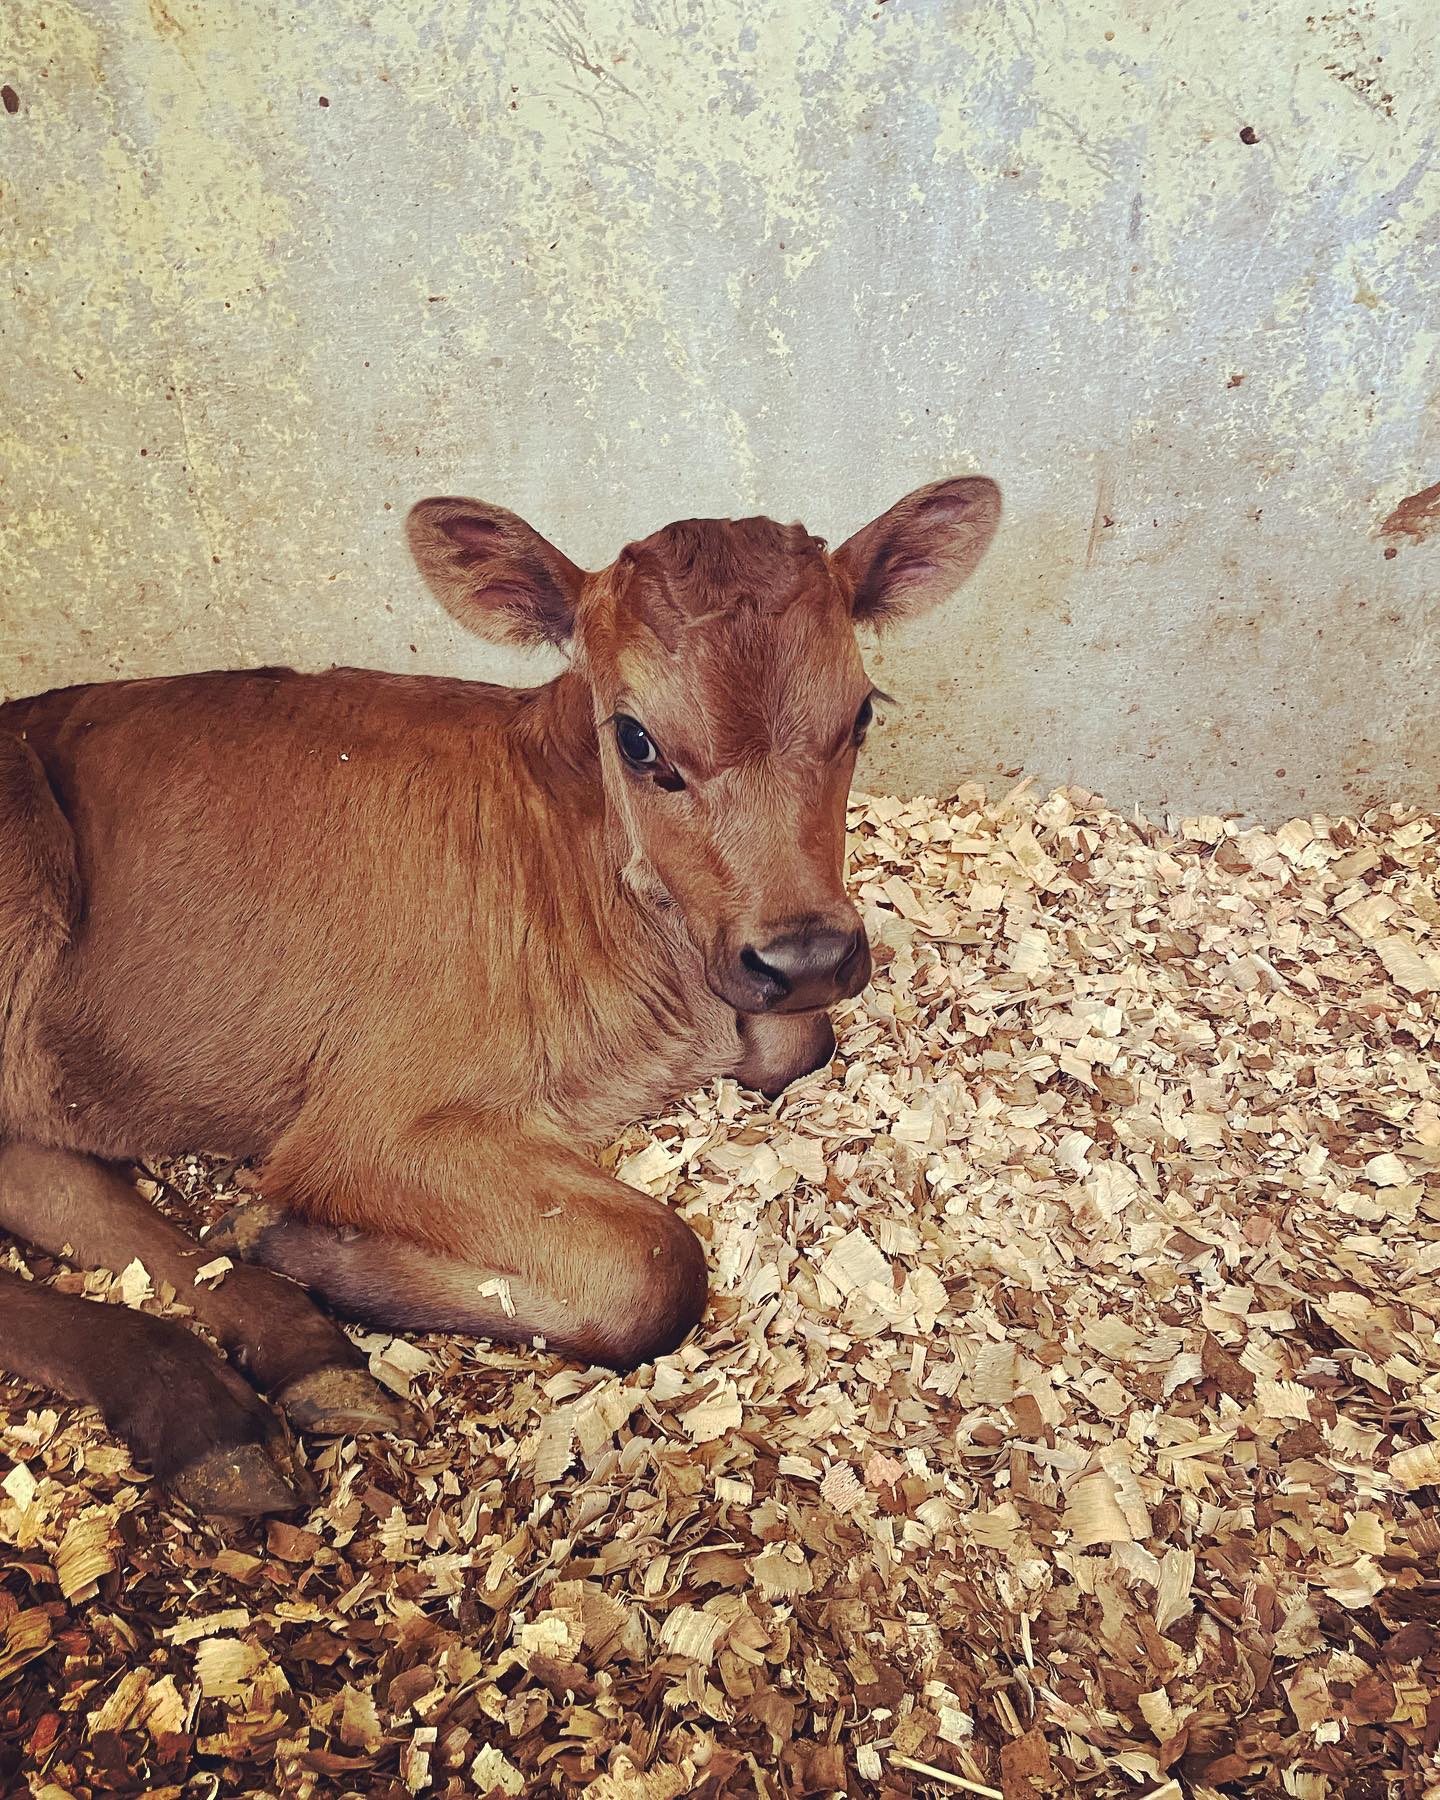 The most beautiful new baby. Gorgeous big brown eyes with long lashes. We have named her Bambi. #babyanimals #calf #babyfarmanimals #baby #newlife #farm #farmlife #cow #cows